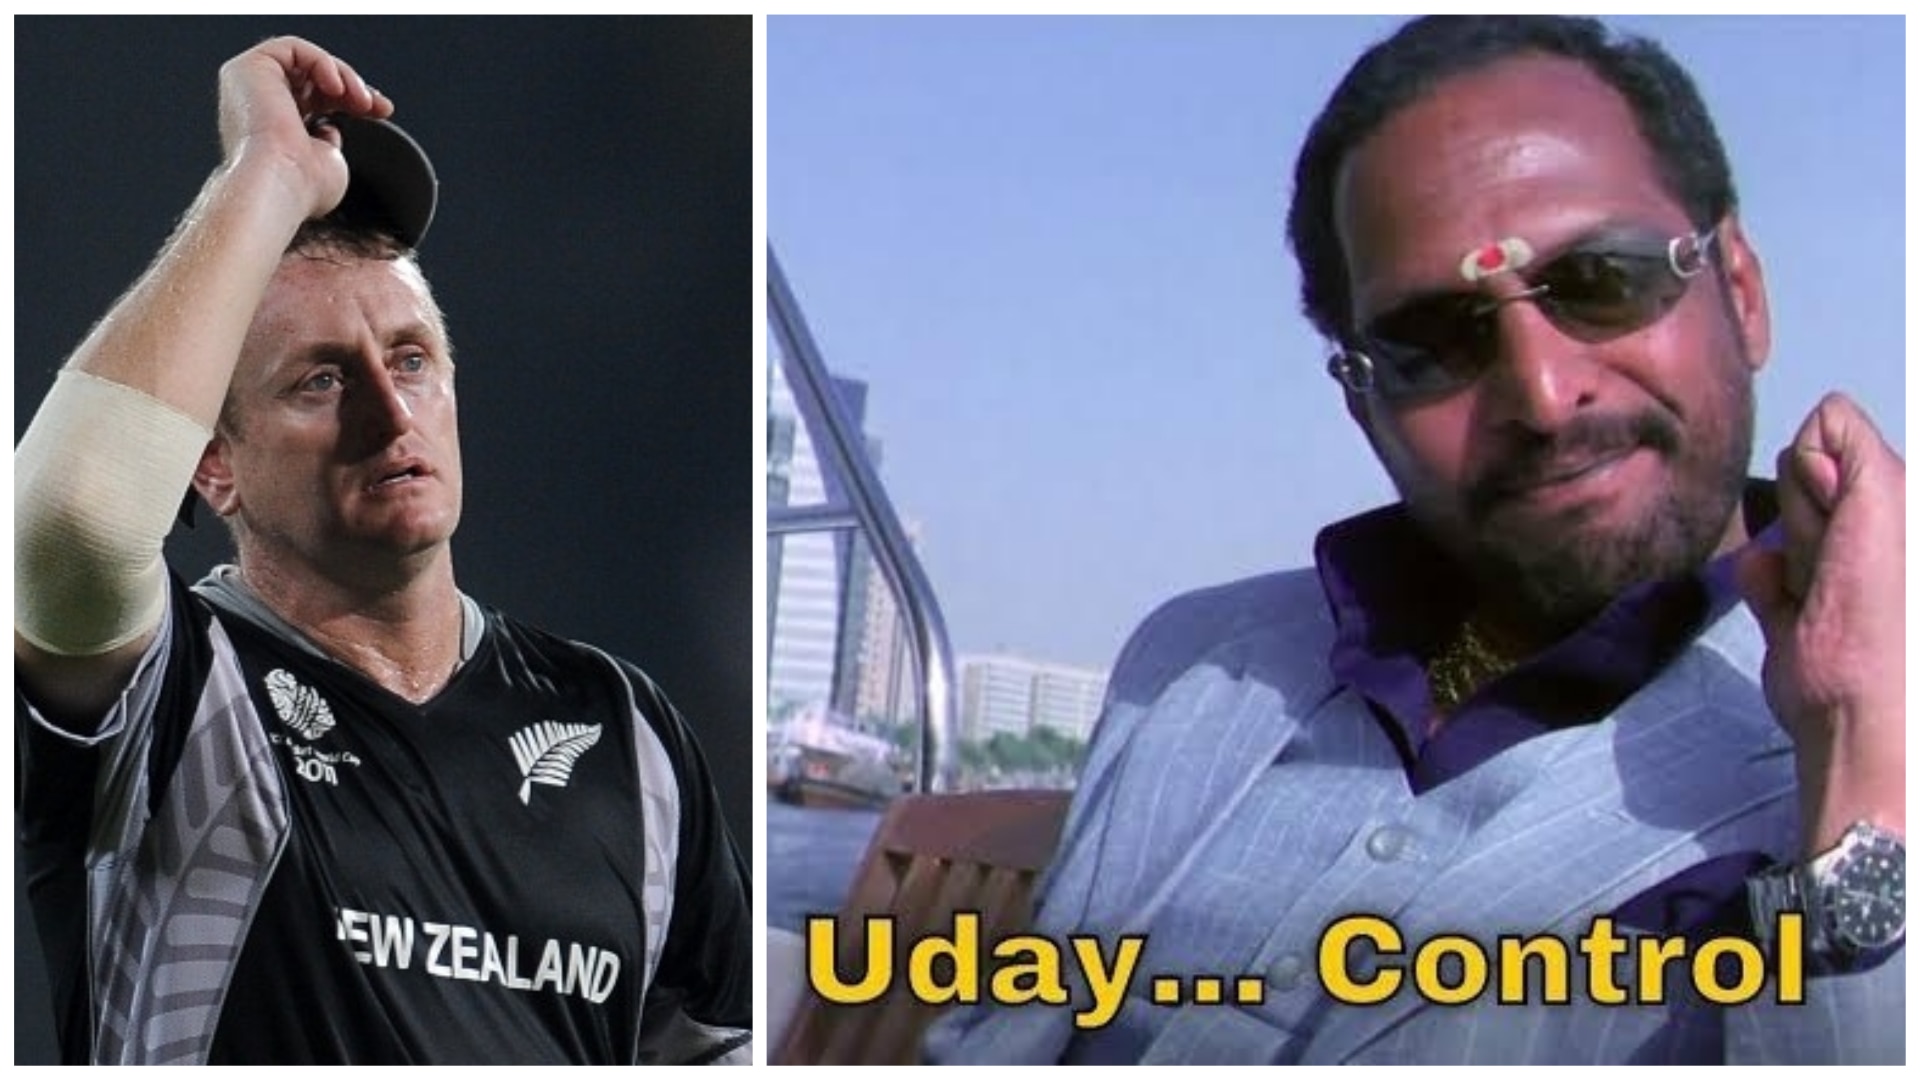 ‘Keep watch over Uday Keep watch over’: Rajasthan Royals’ Hilarious ‘Welcome’ Tweet In Answer To Scott Styris’ Predictions